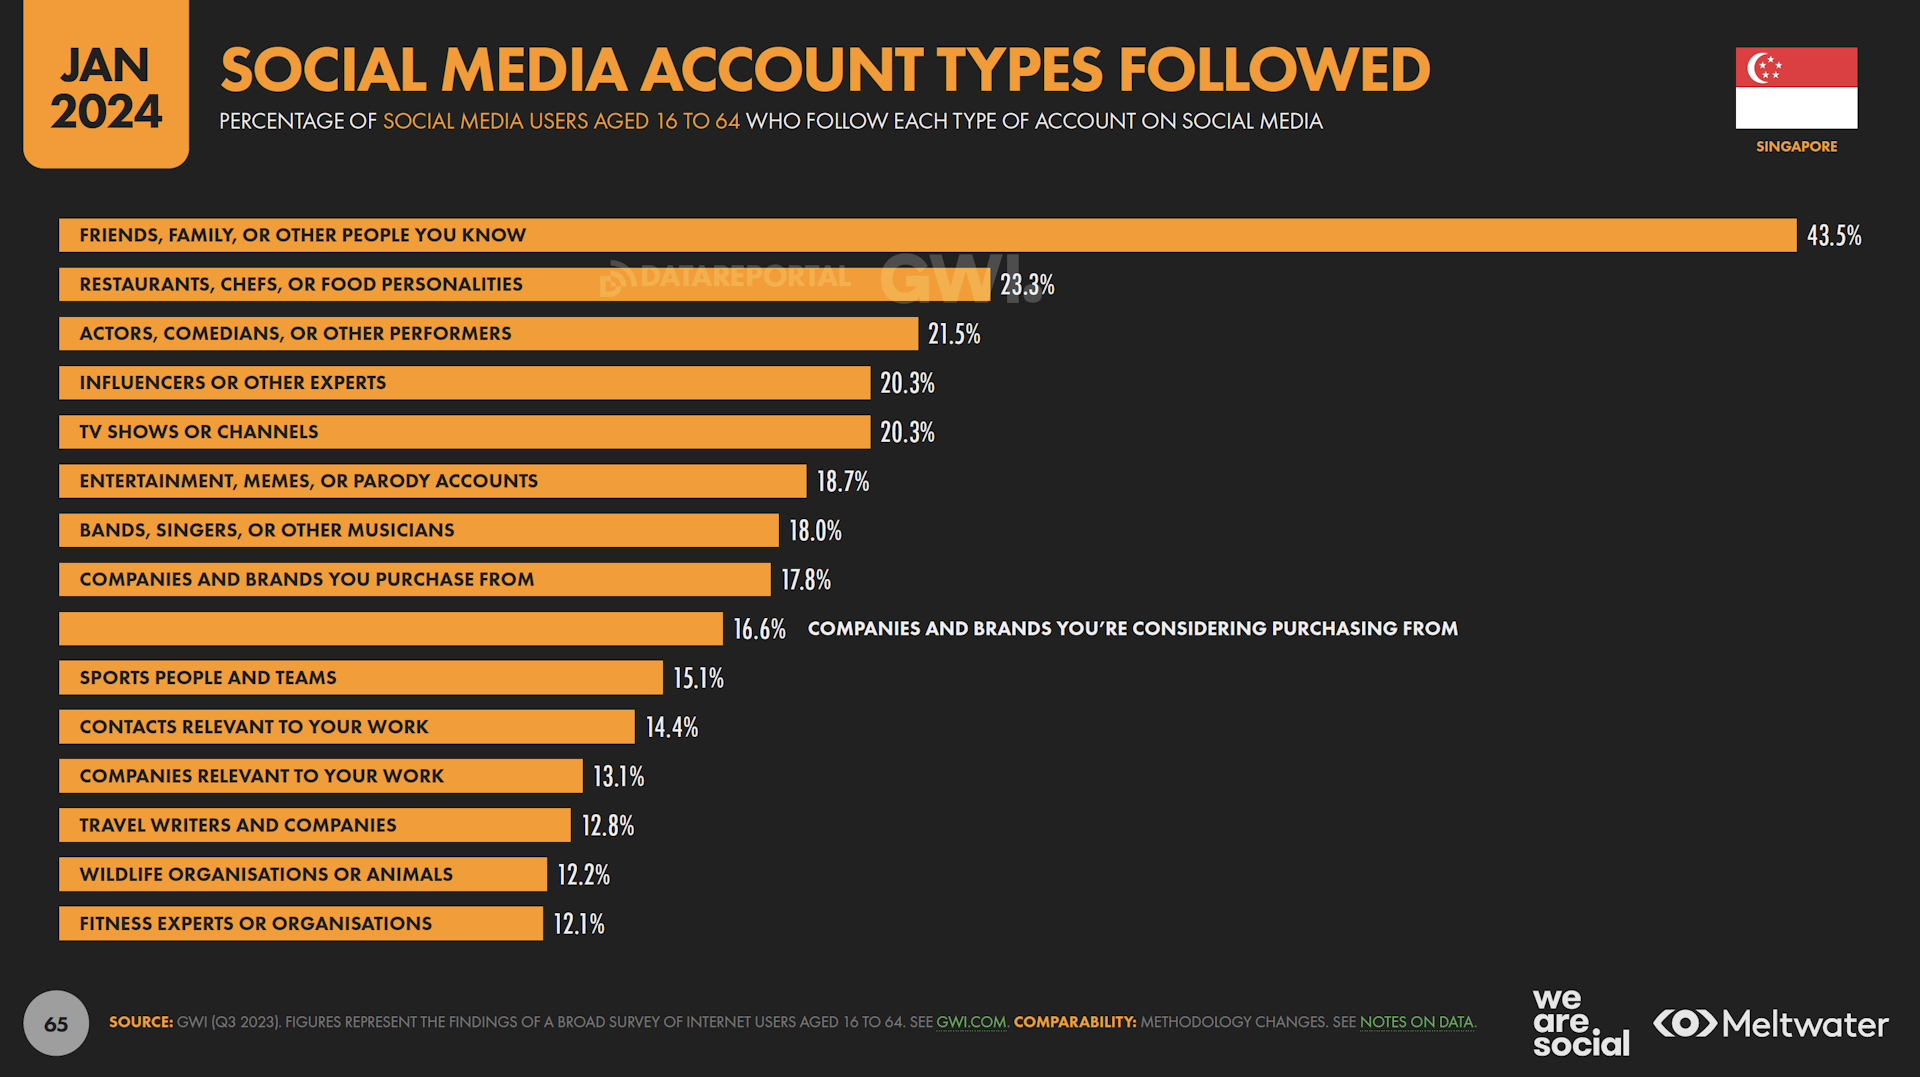 Types of social media account followed based on Global Digital Report 2024 for Singapore